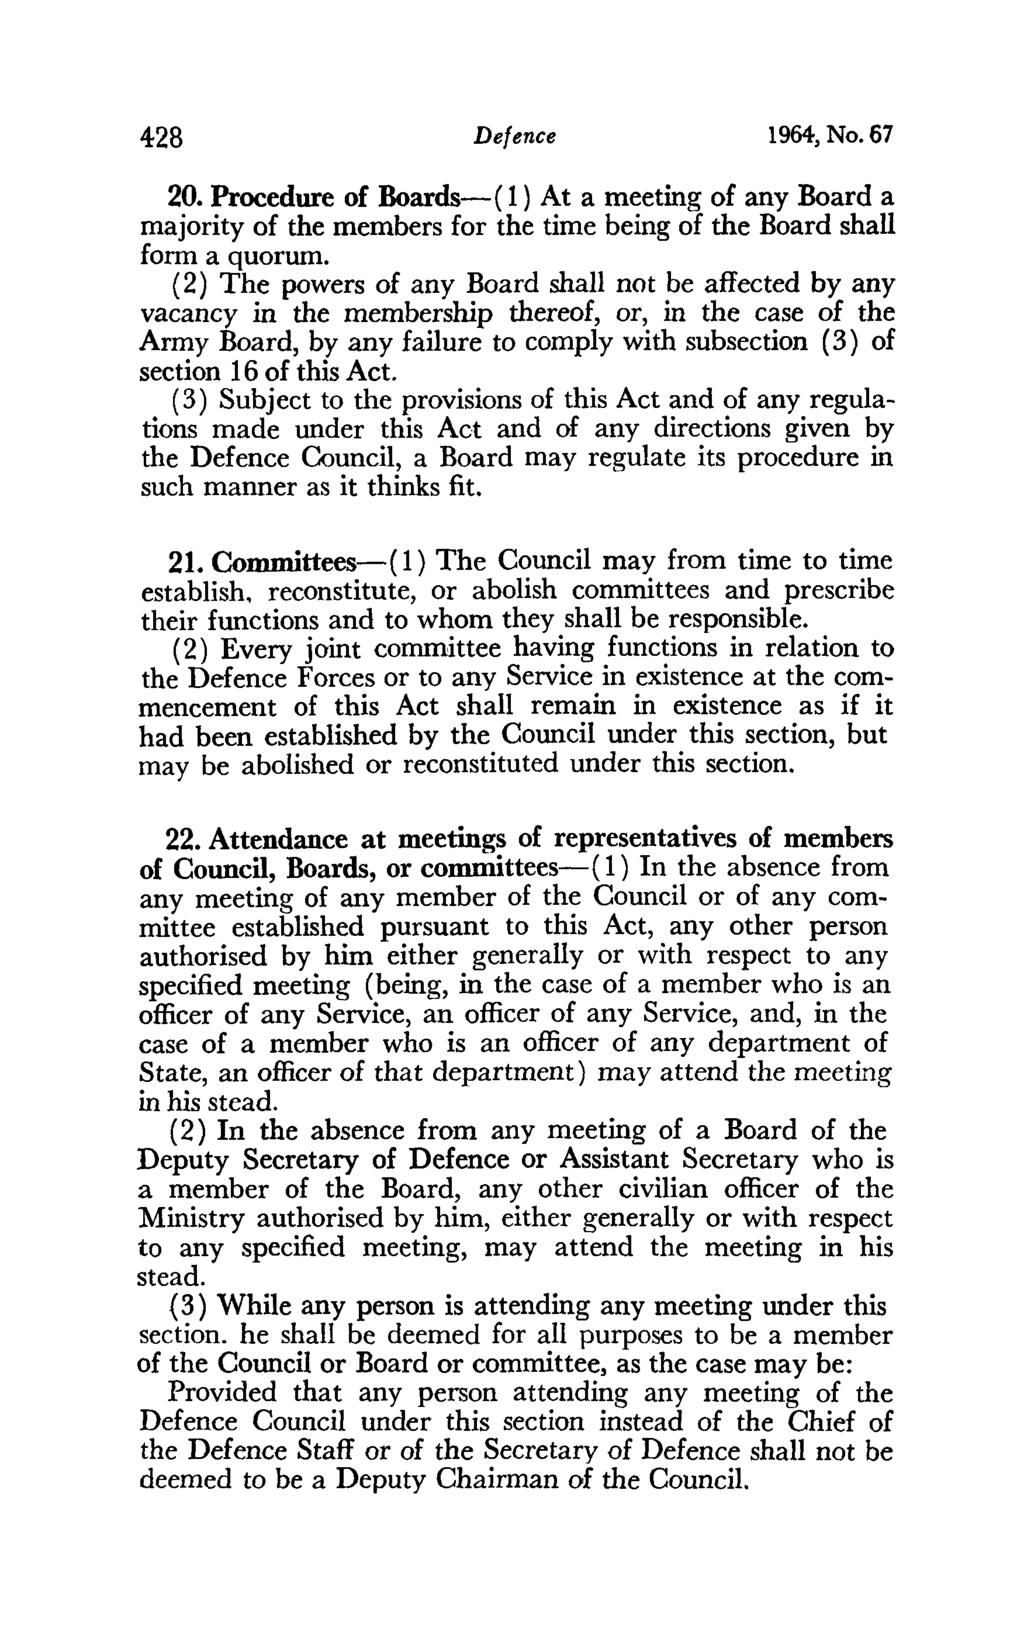 428 Defence 1964, No. 67 20. Procedure of Boards-( 1 ) At a meeting of any Board a majority of the members for the time being of the Board shall form a quorum.